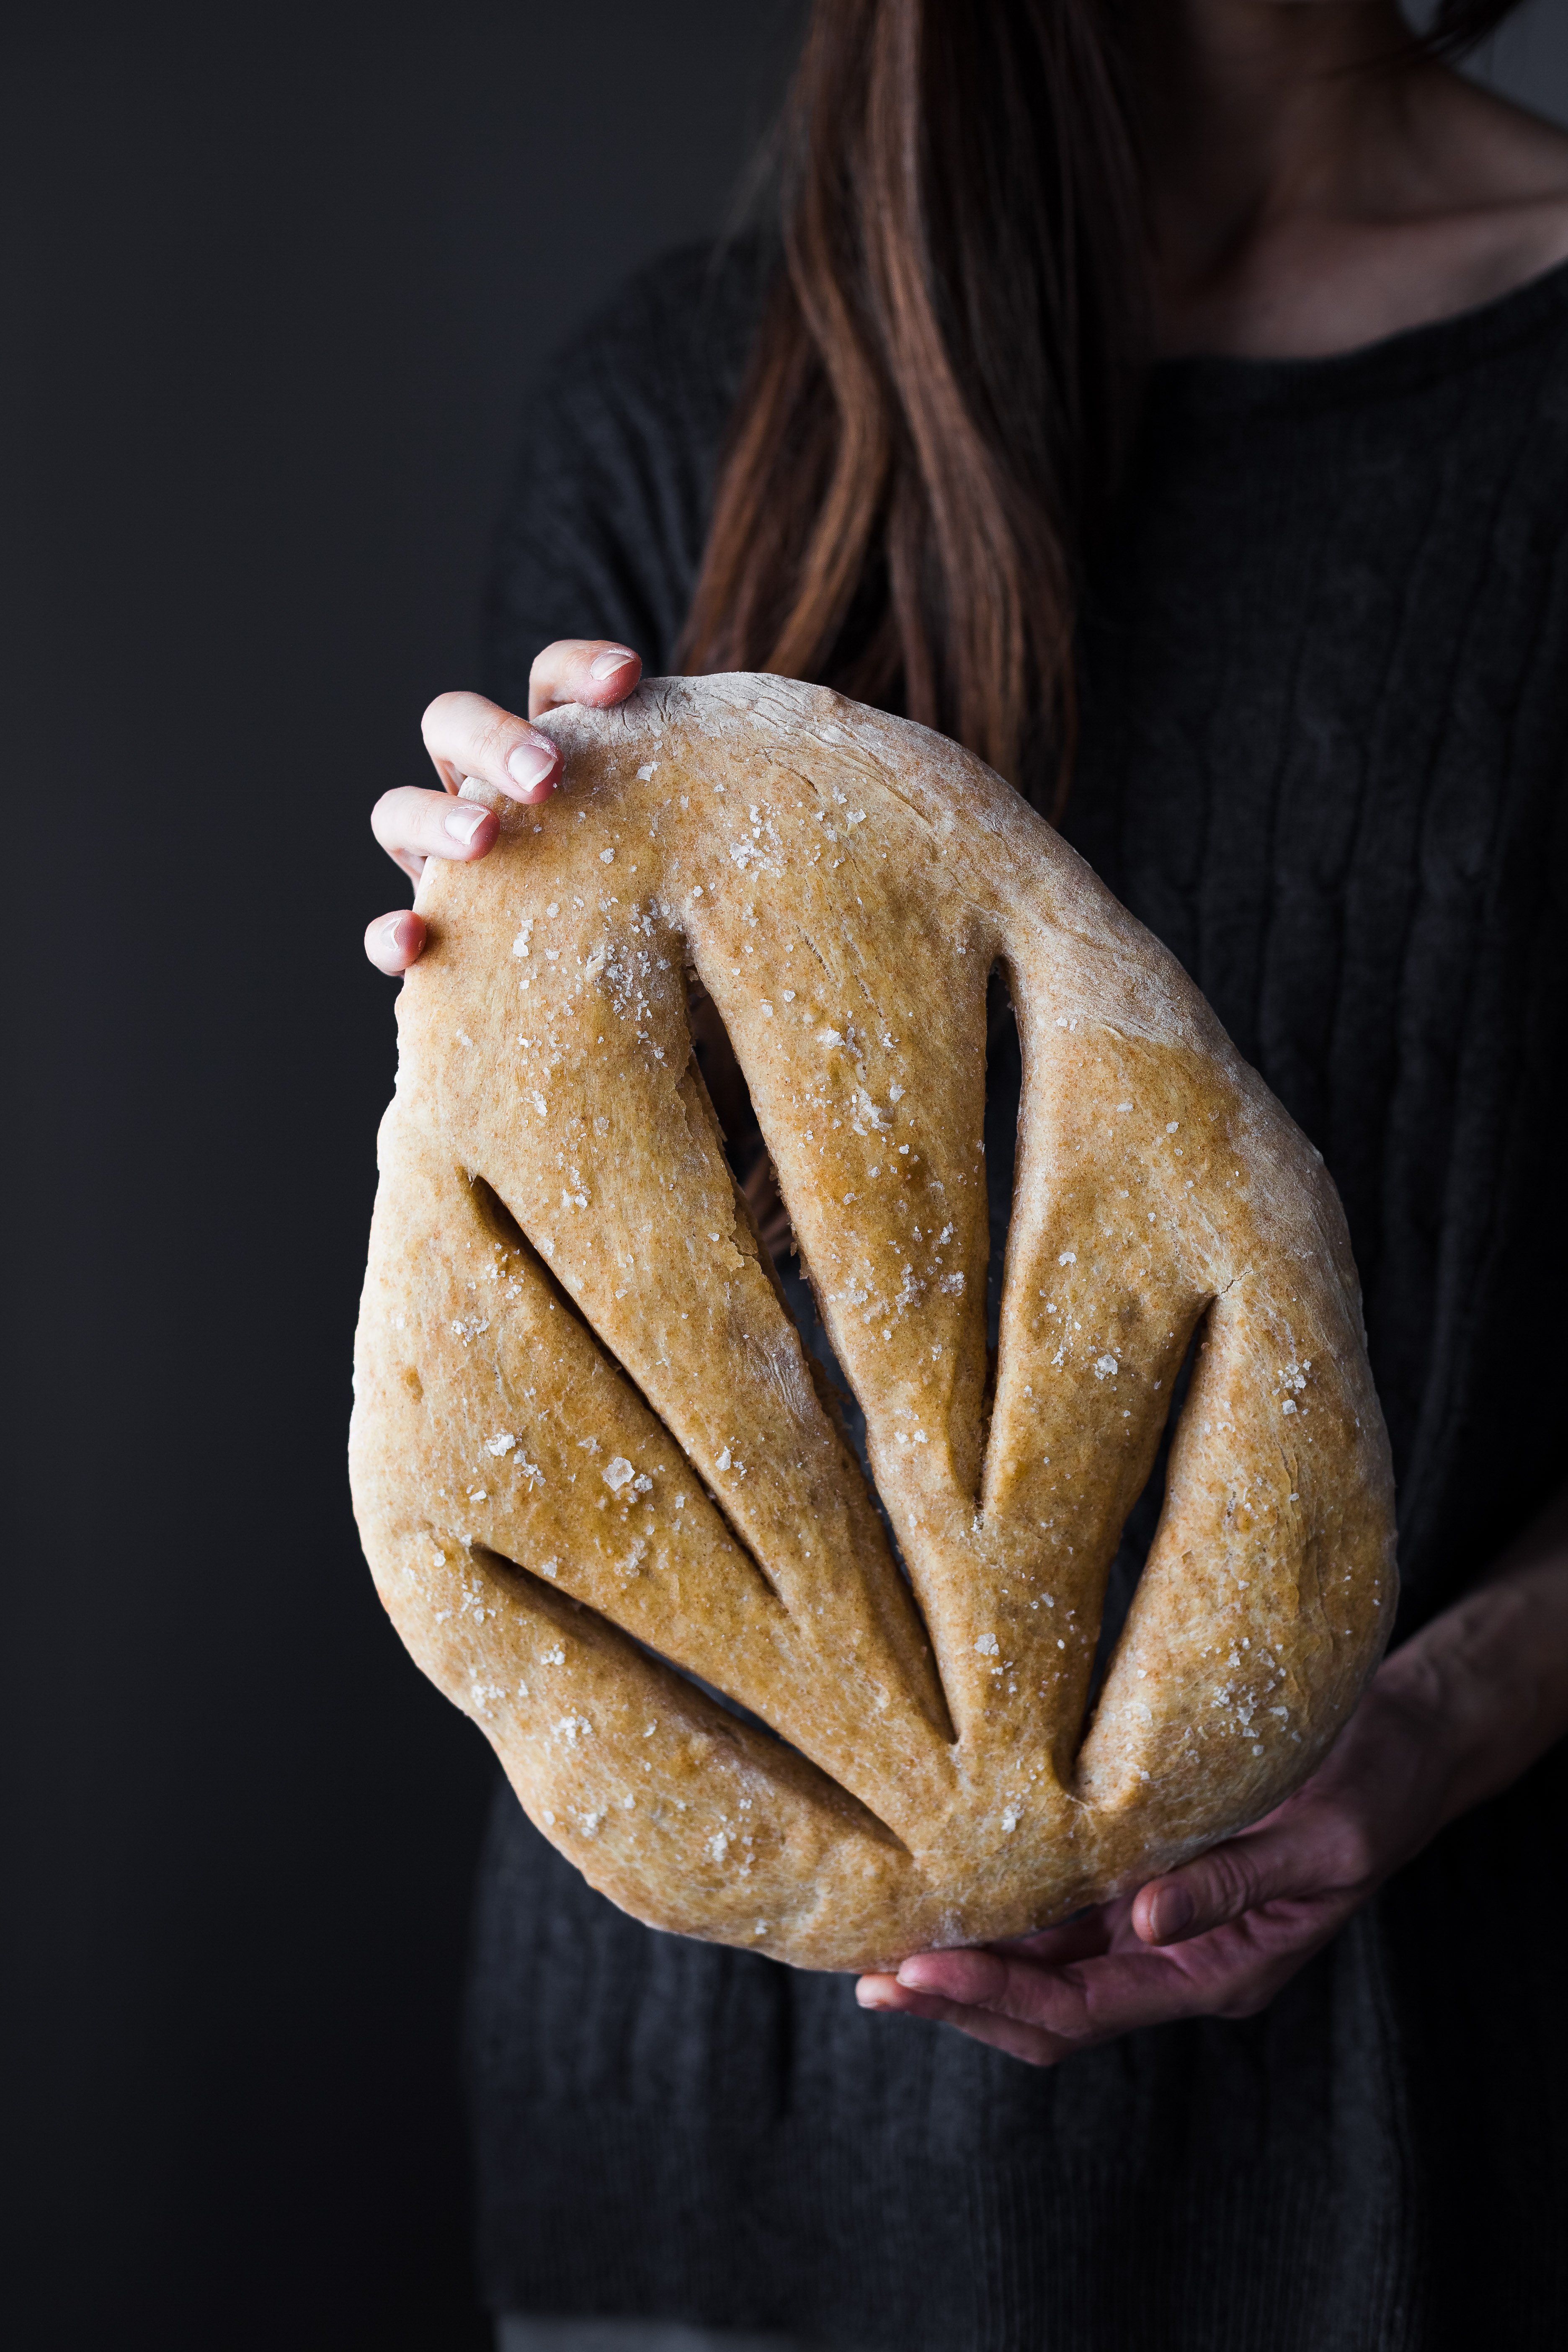 A head on image of a person holding a loaf of No Knead Garlic Fougasse bread.